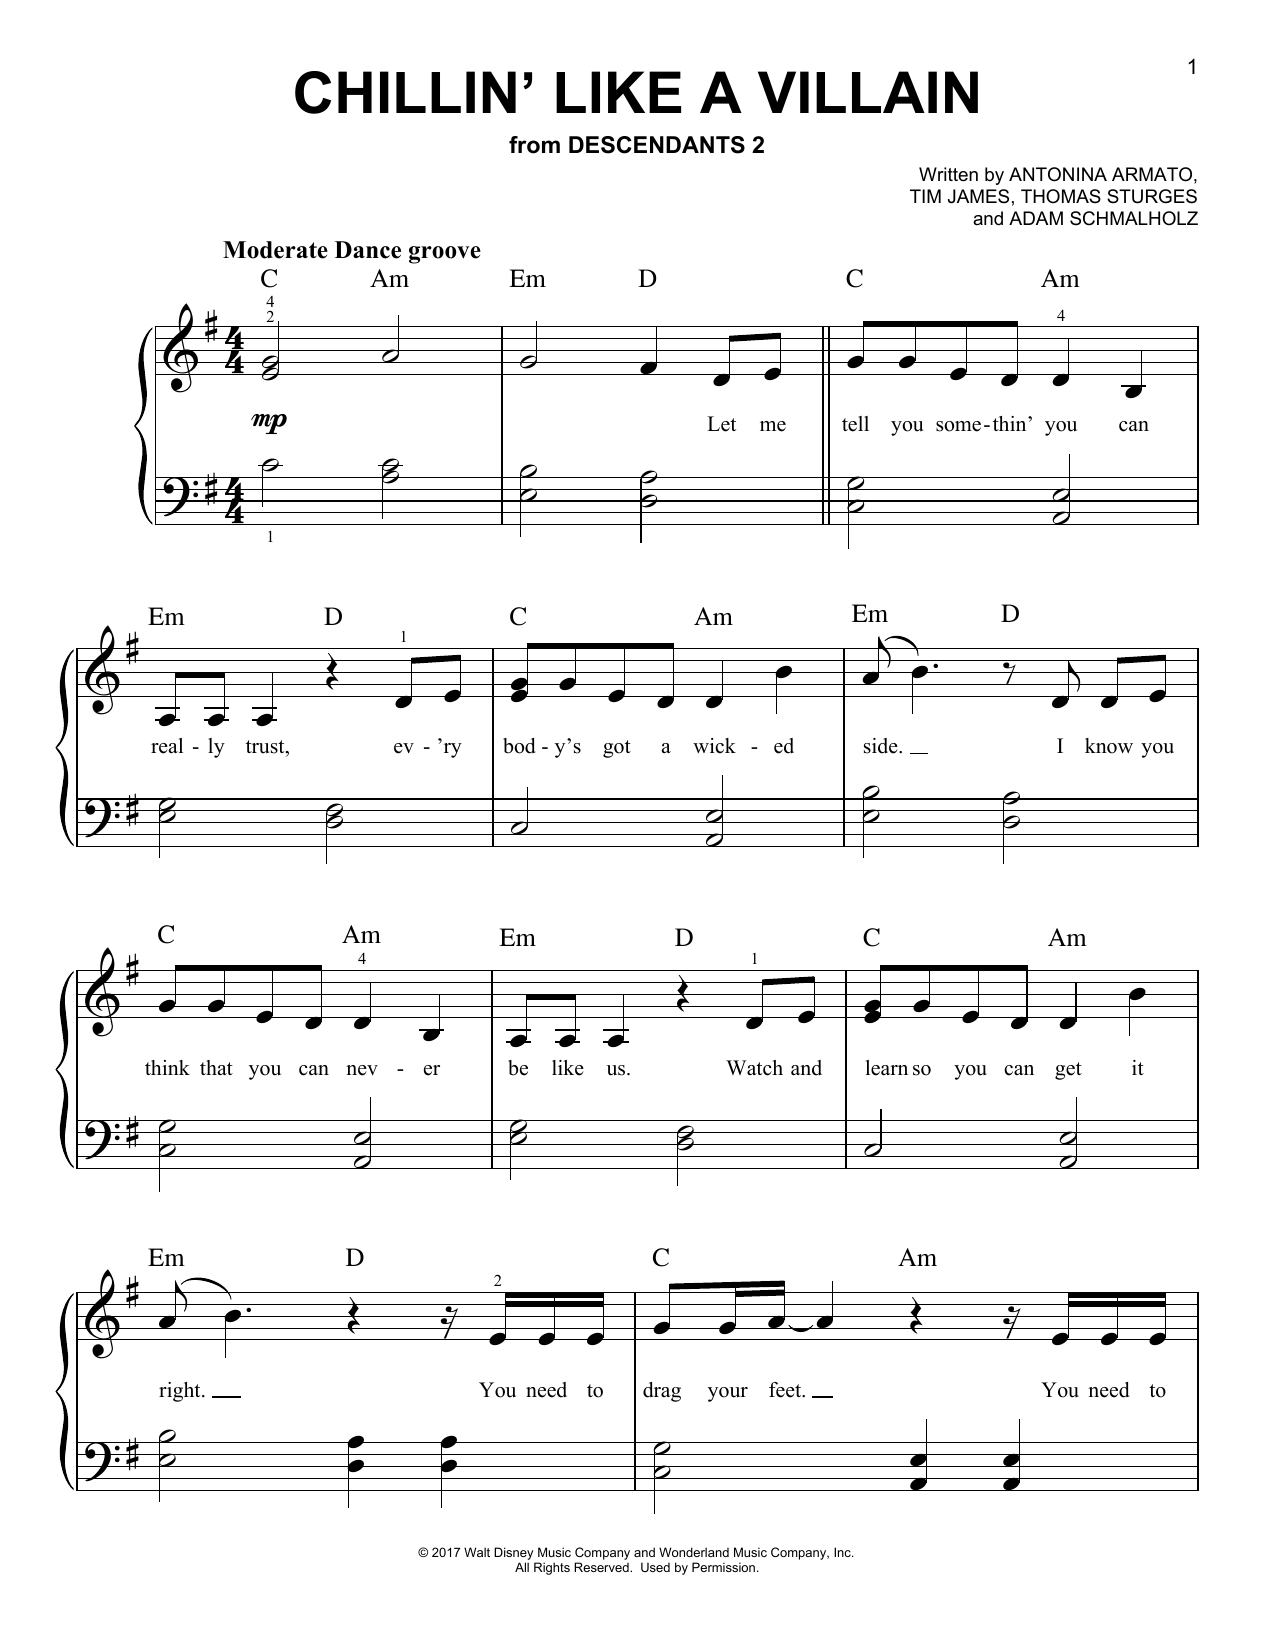 Adam Schmalholz Chillin' Like a Villain (from Disney's Descendants 2) sheet music notes and chords. Download Printable PDF.